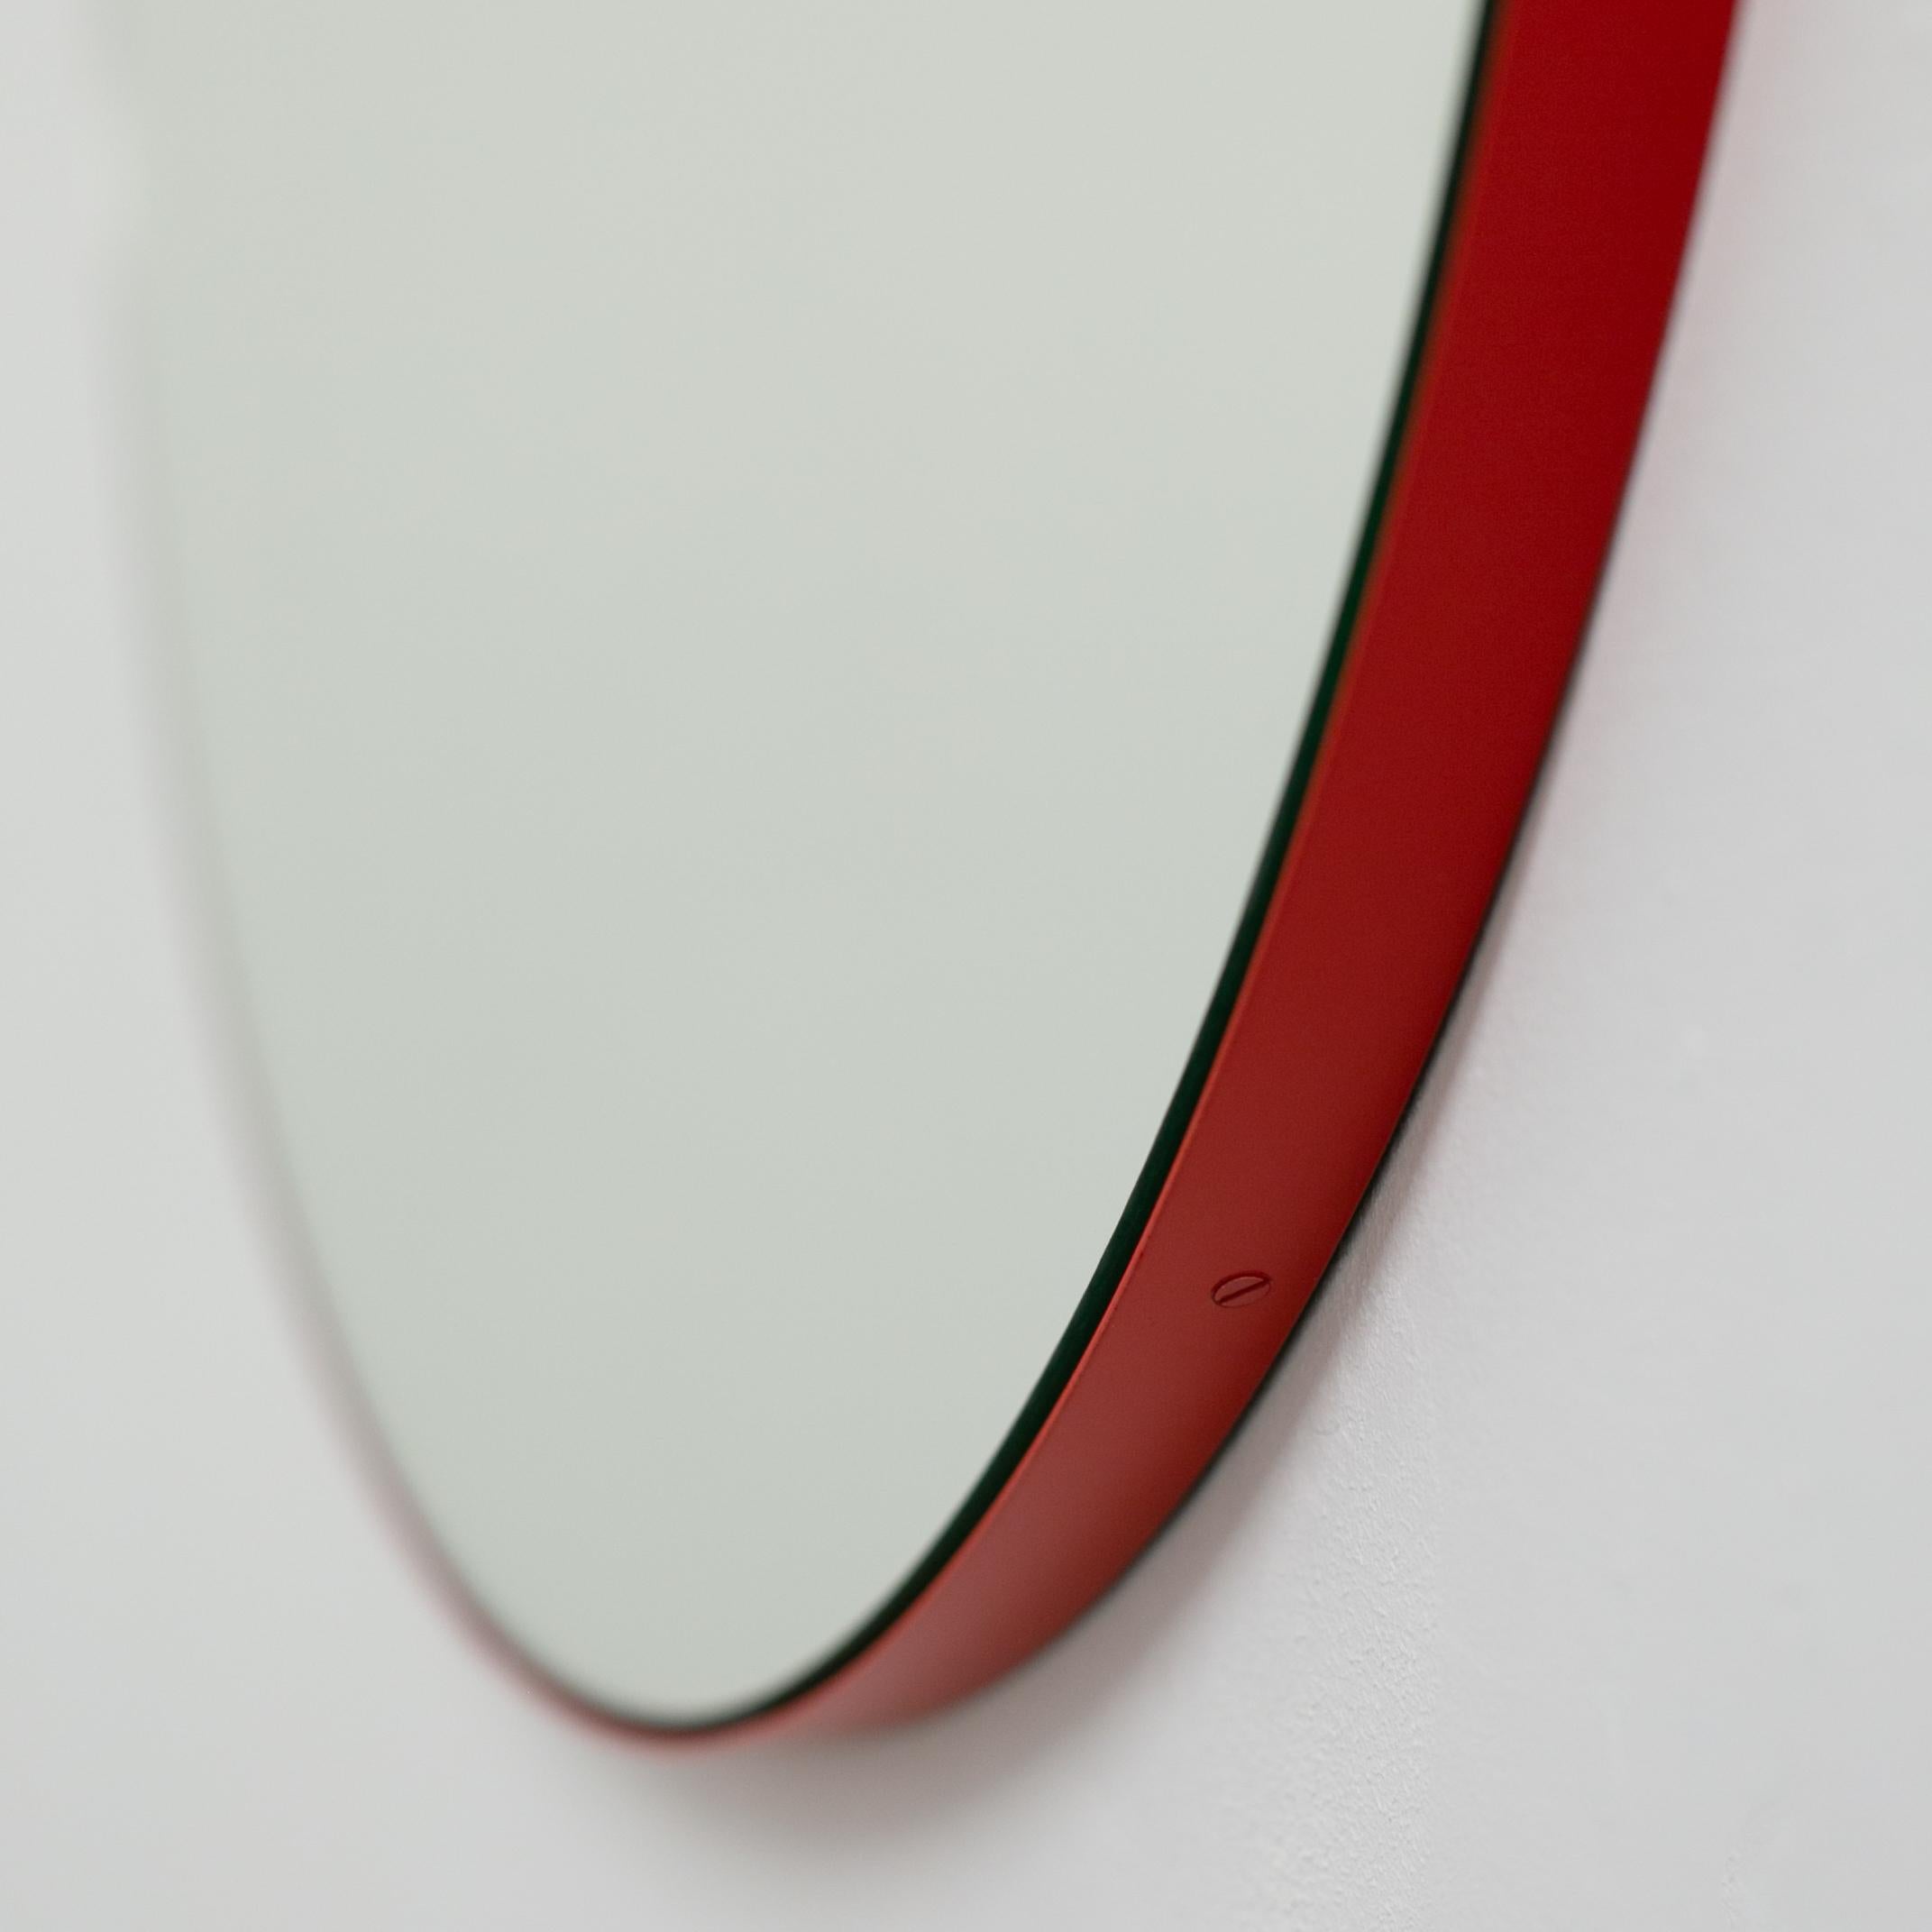 Minimalist round mirror with a modern aluminium powder coated red frame. Designed and handcrafted in London, UK.

Our mirrors are designed with an integrated French cleat (split batten) system that ensures the mirror is securely mounted flush with